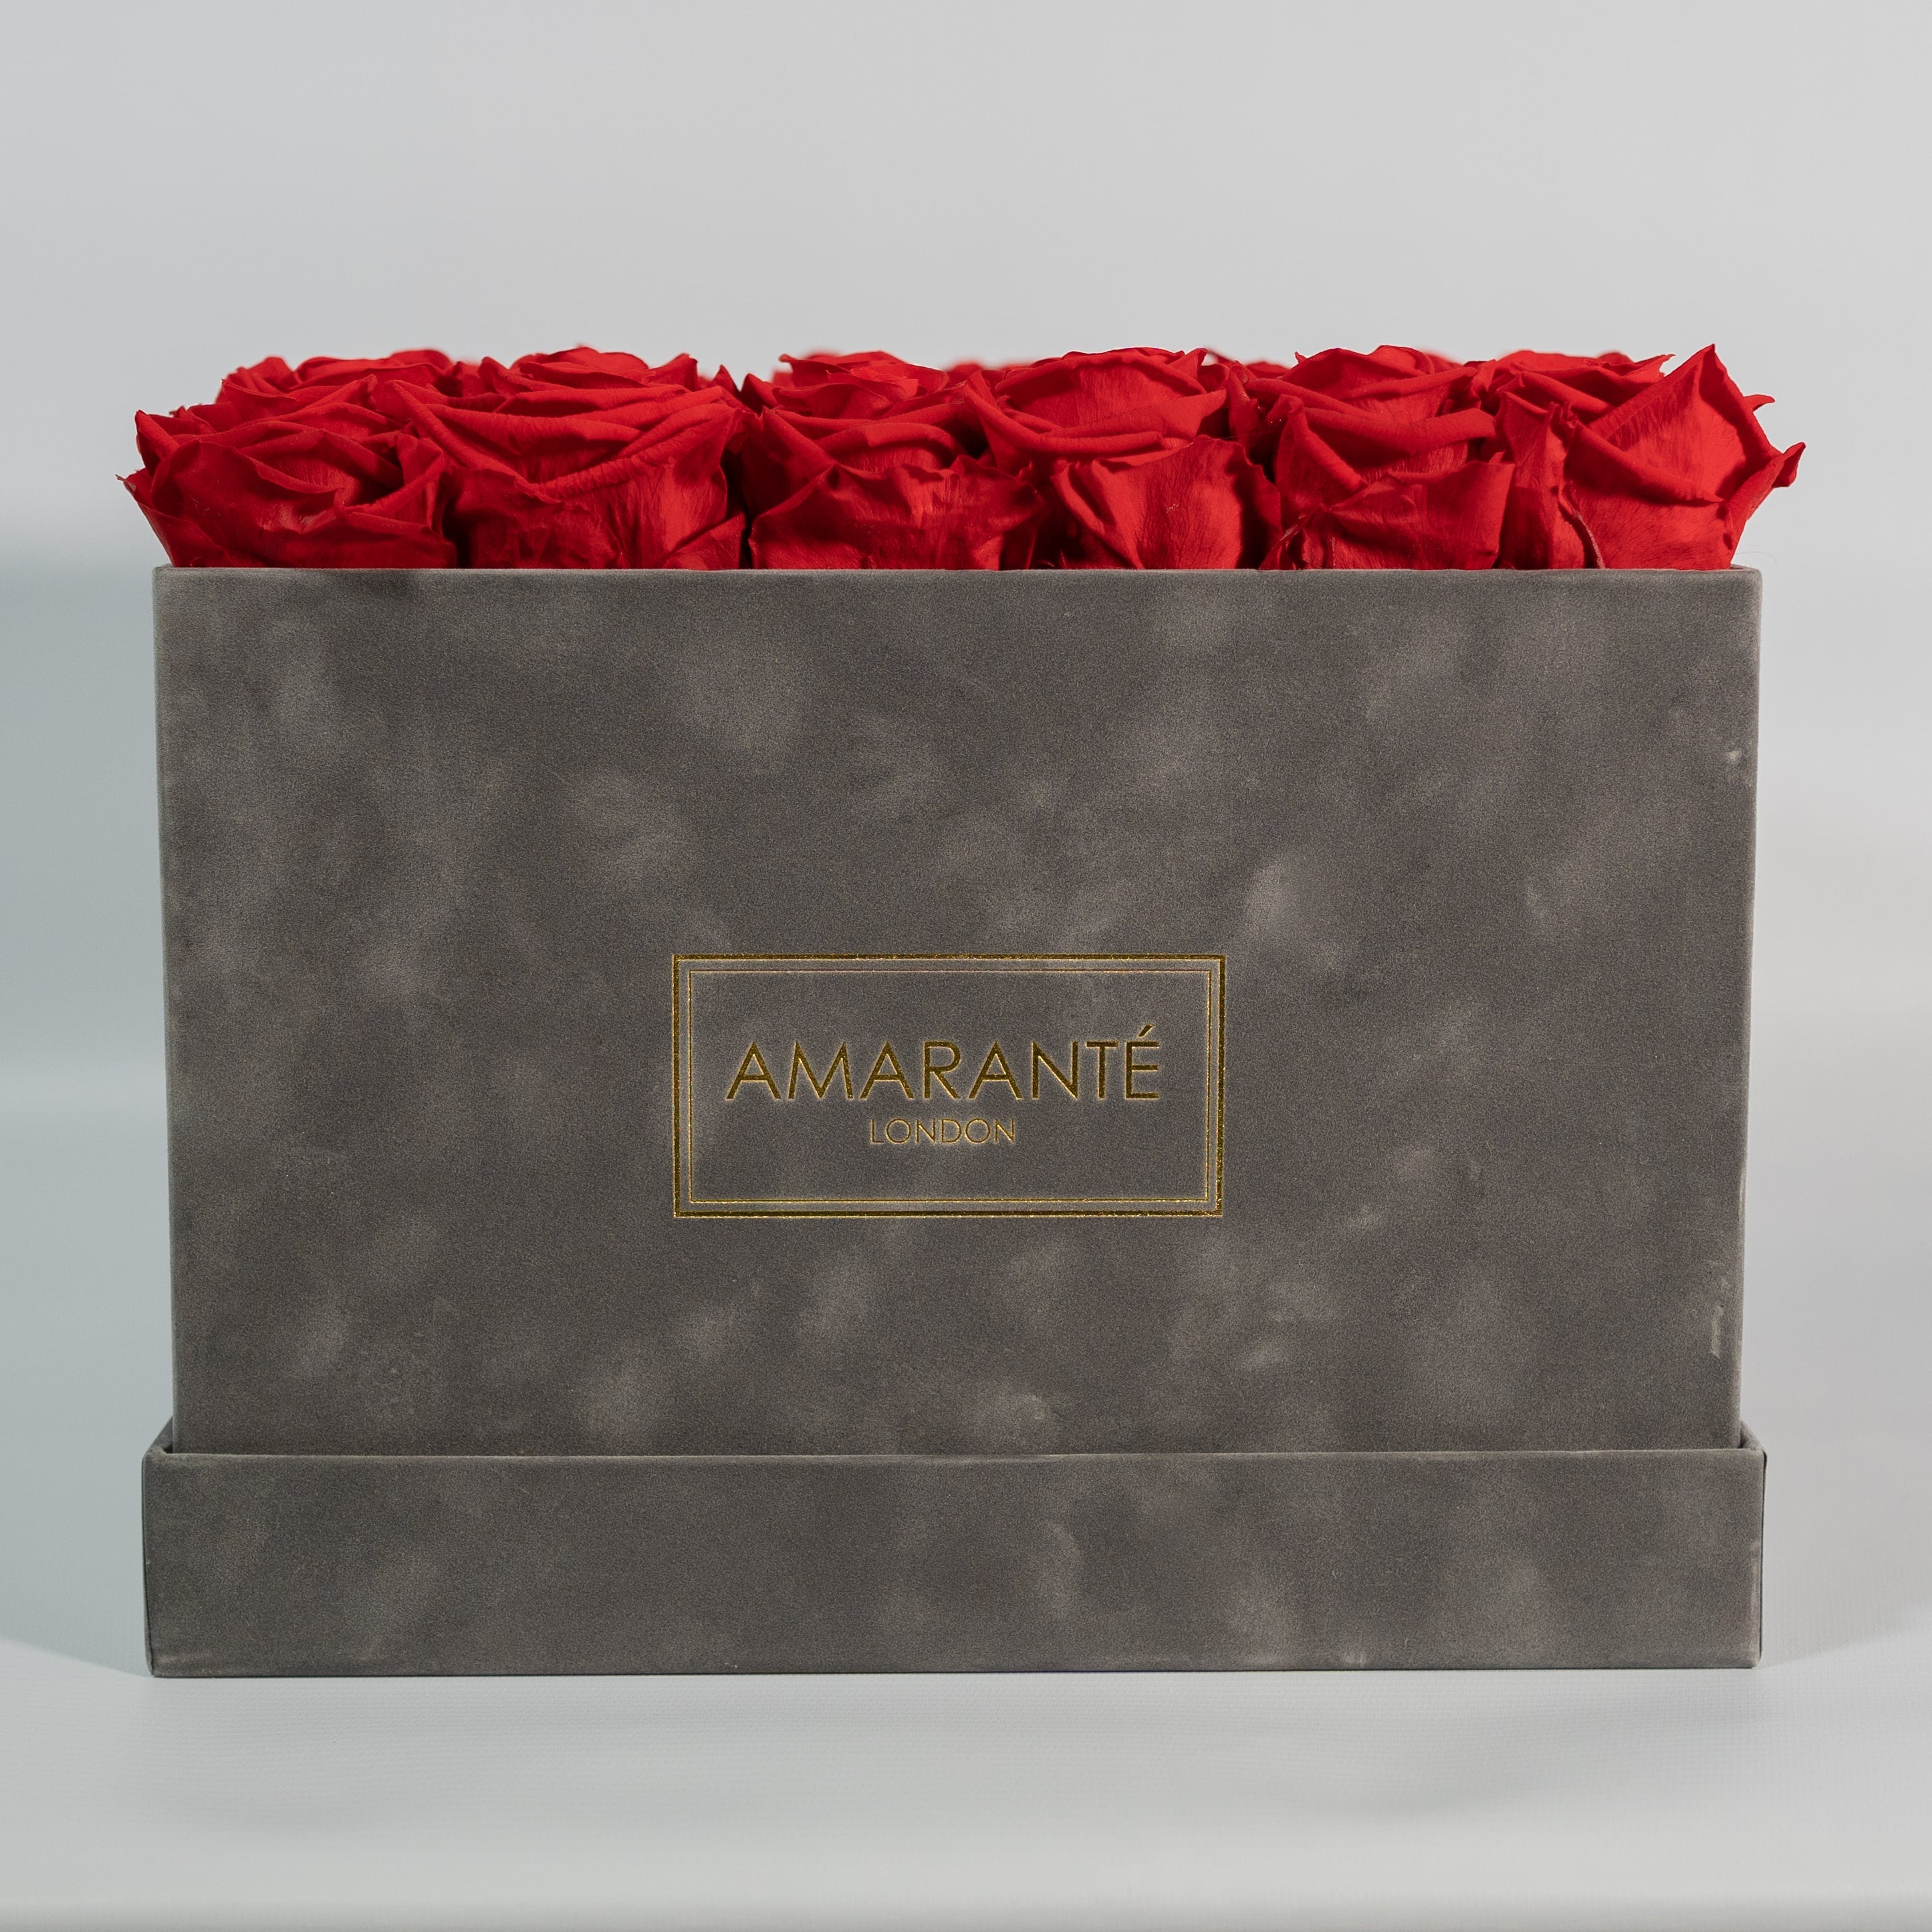 Dreamy red Roses for expressing love, romance, and courage. 